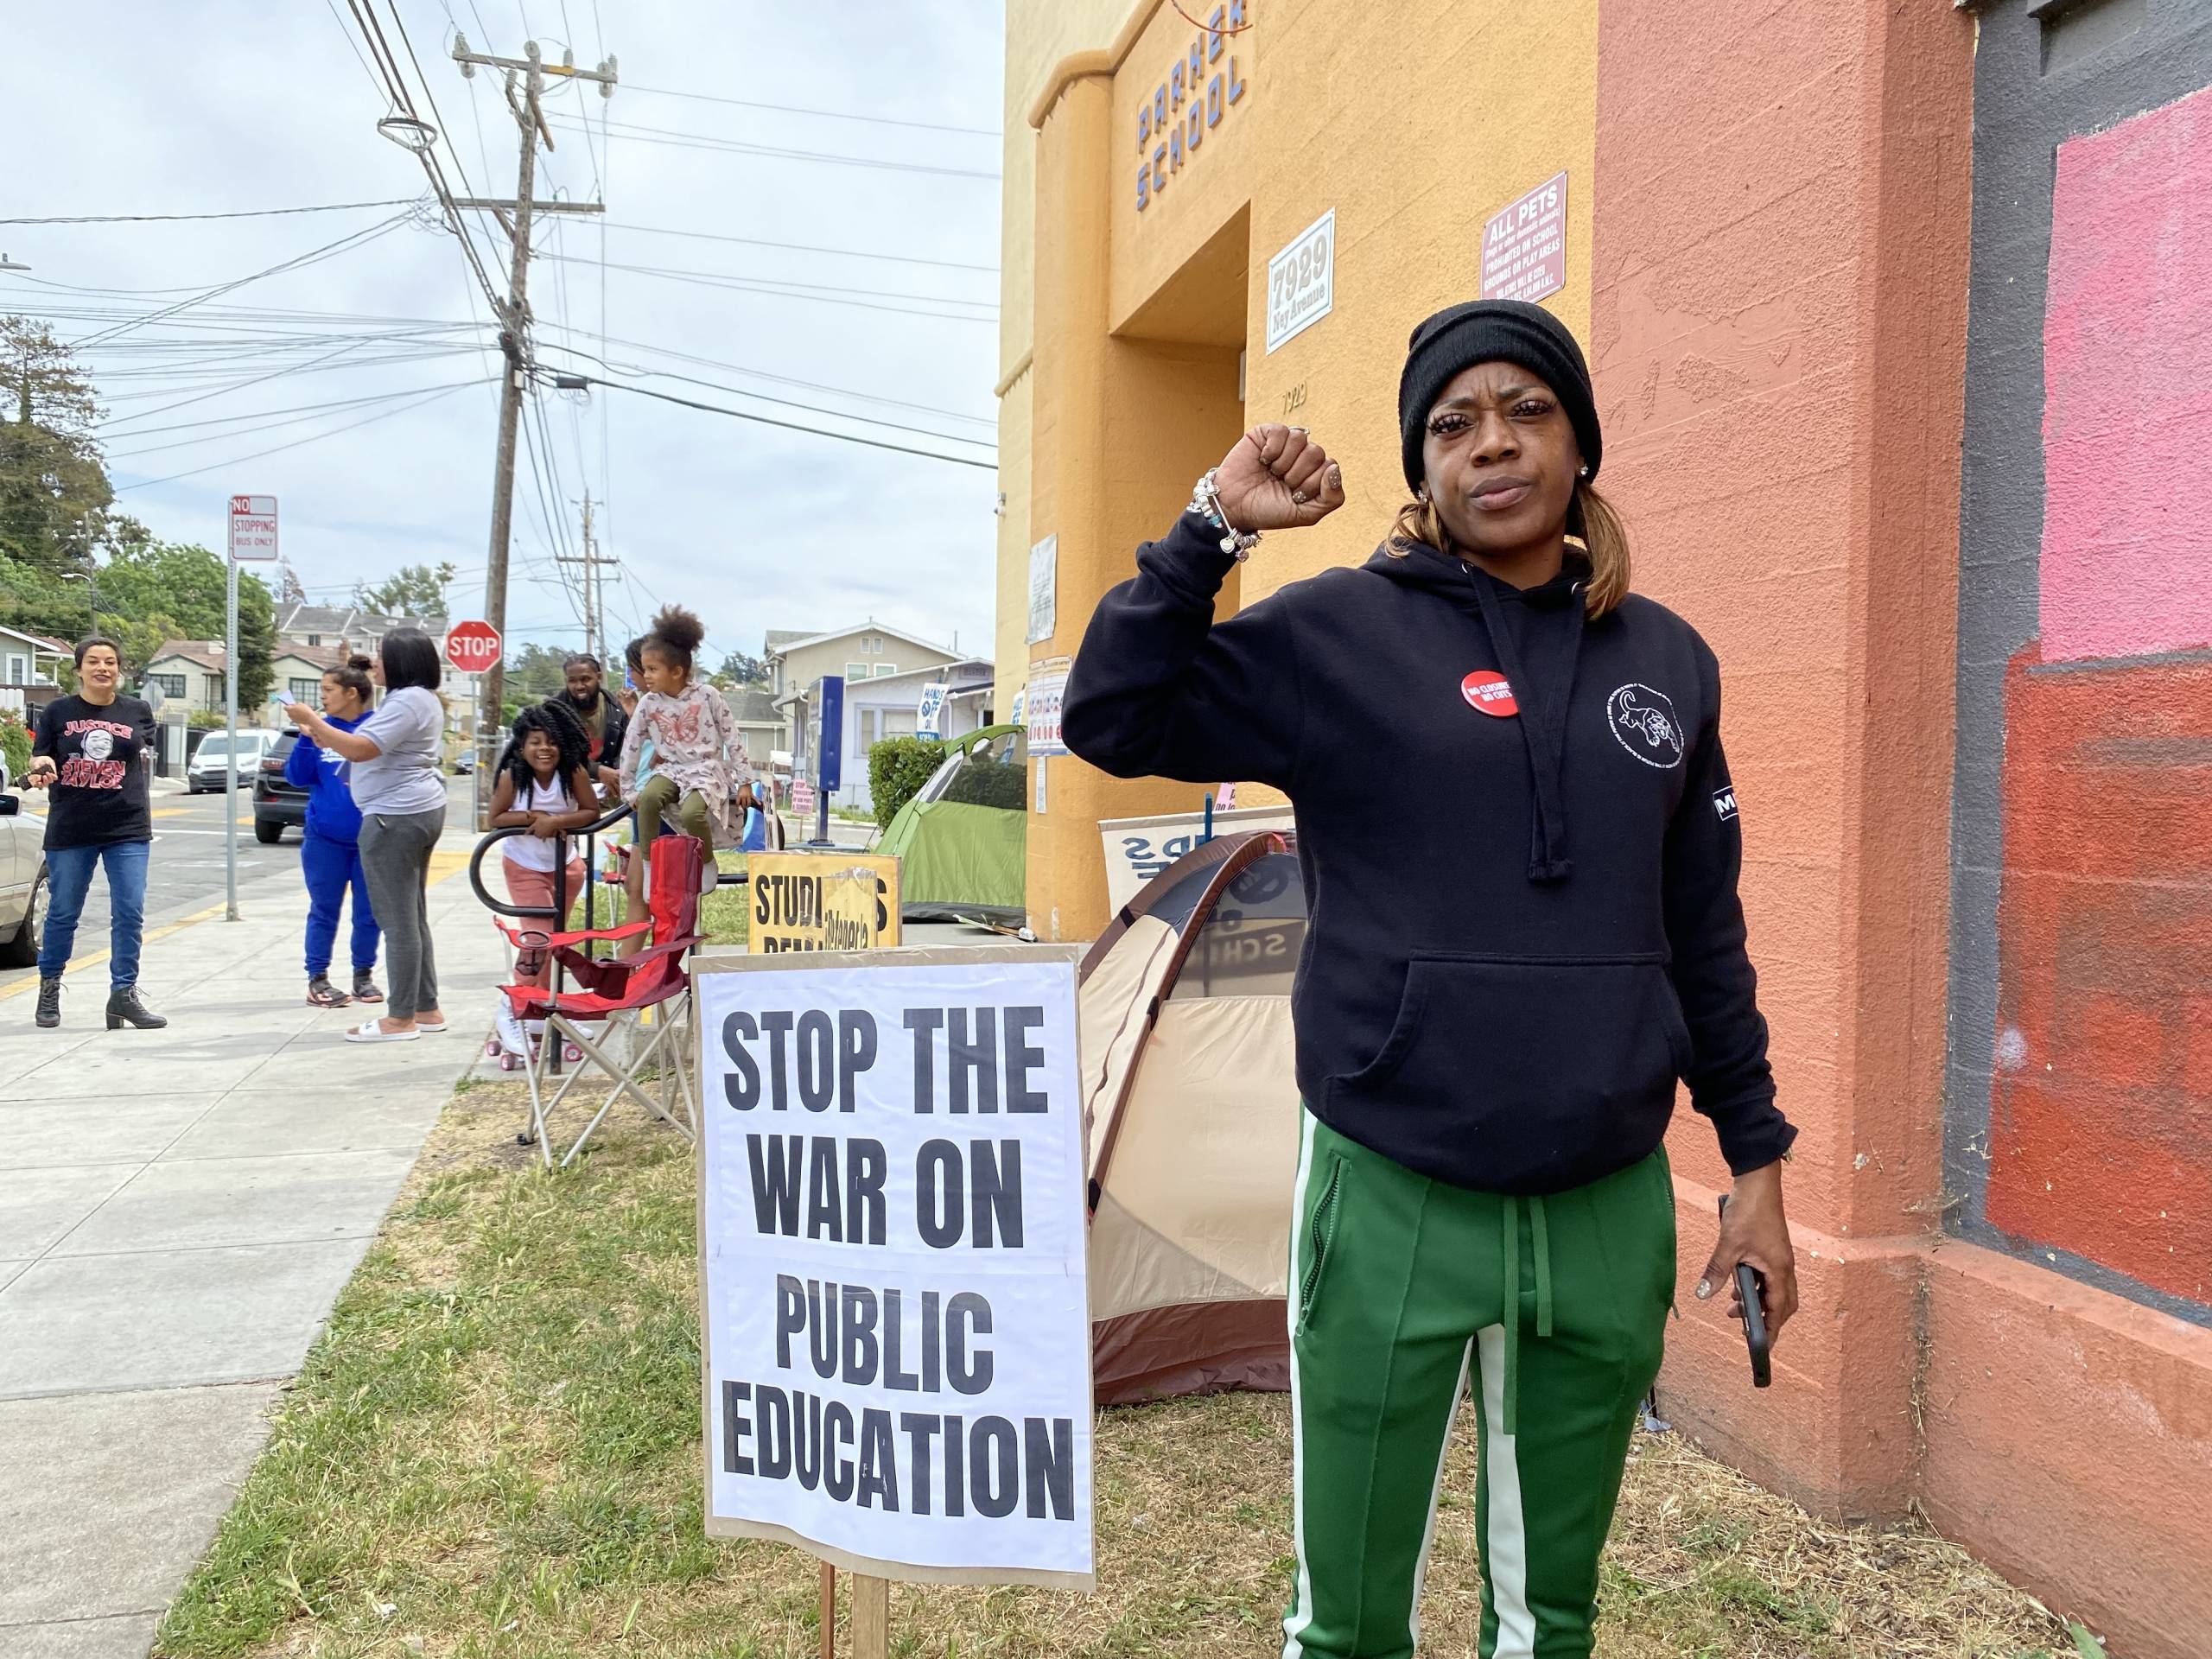 A woman stands outside a building with her fist up. A sign next to her says "stop the war on public education."